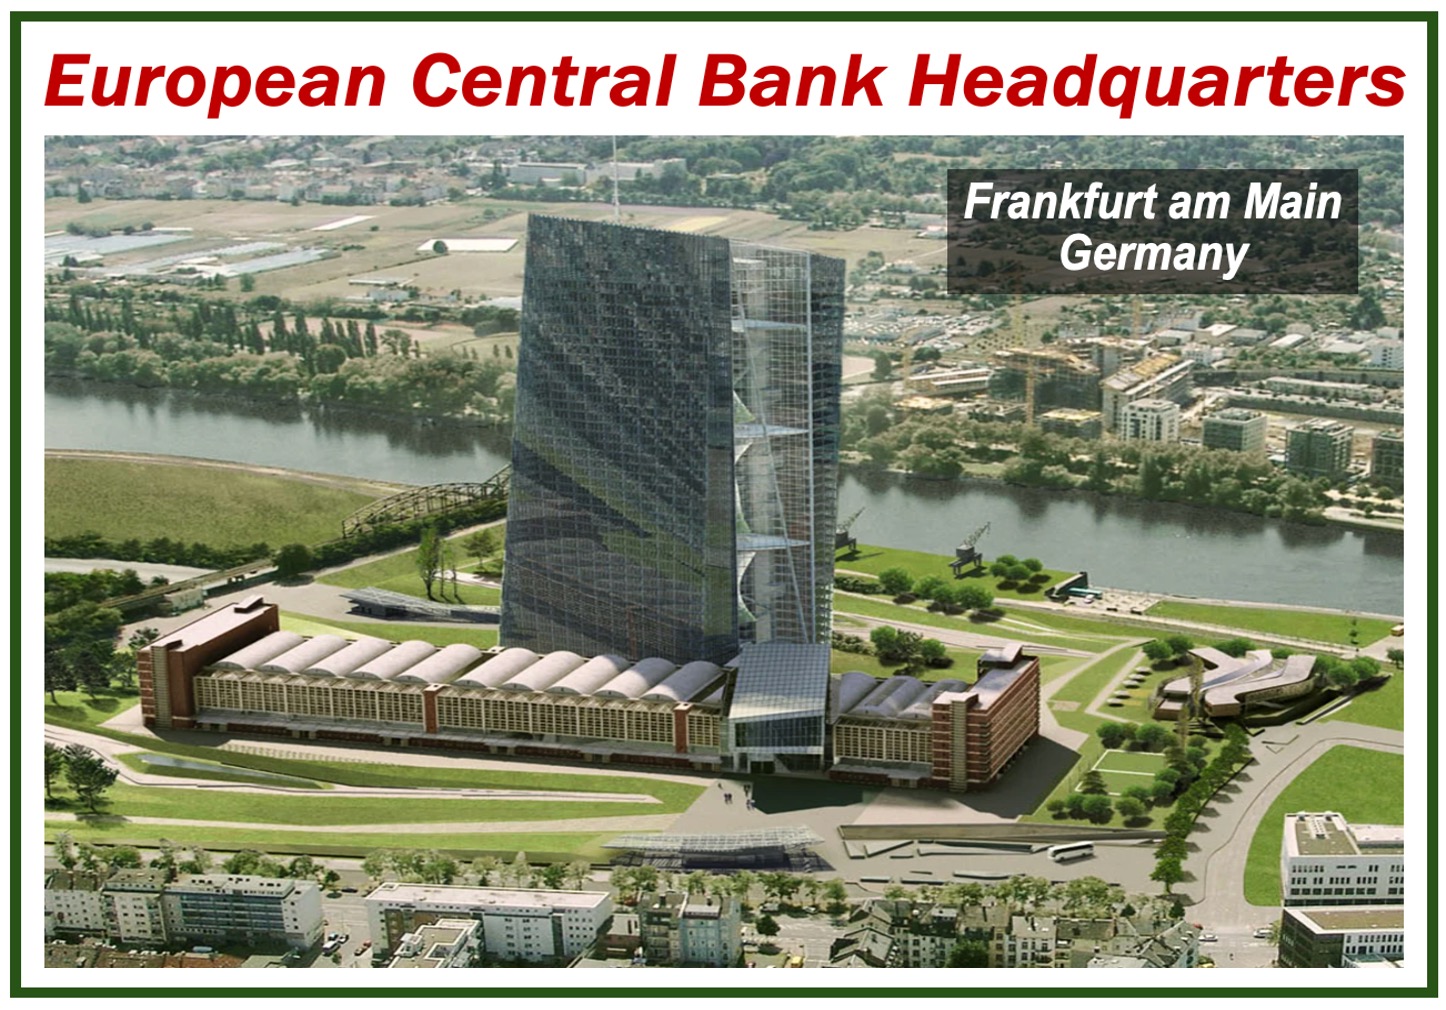 Photo of the European Central Bank headquarters in Frankfurt, Germany